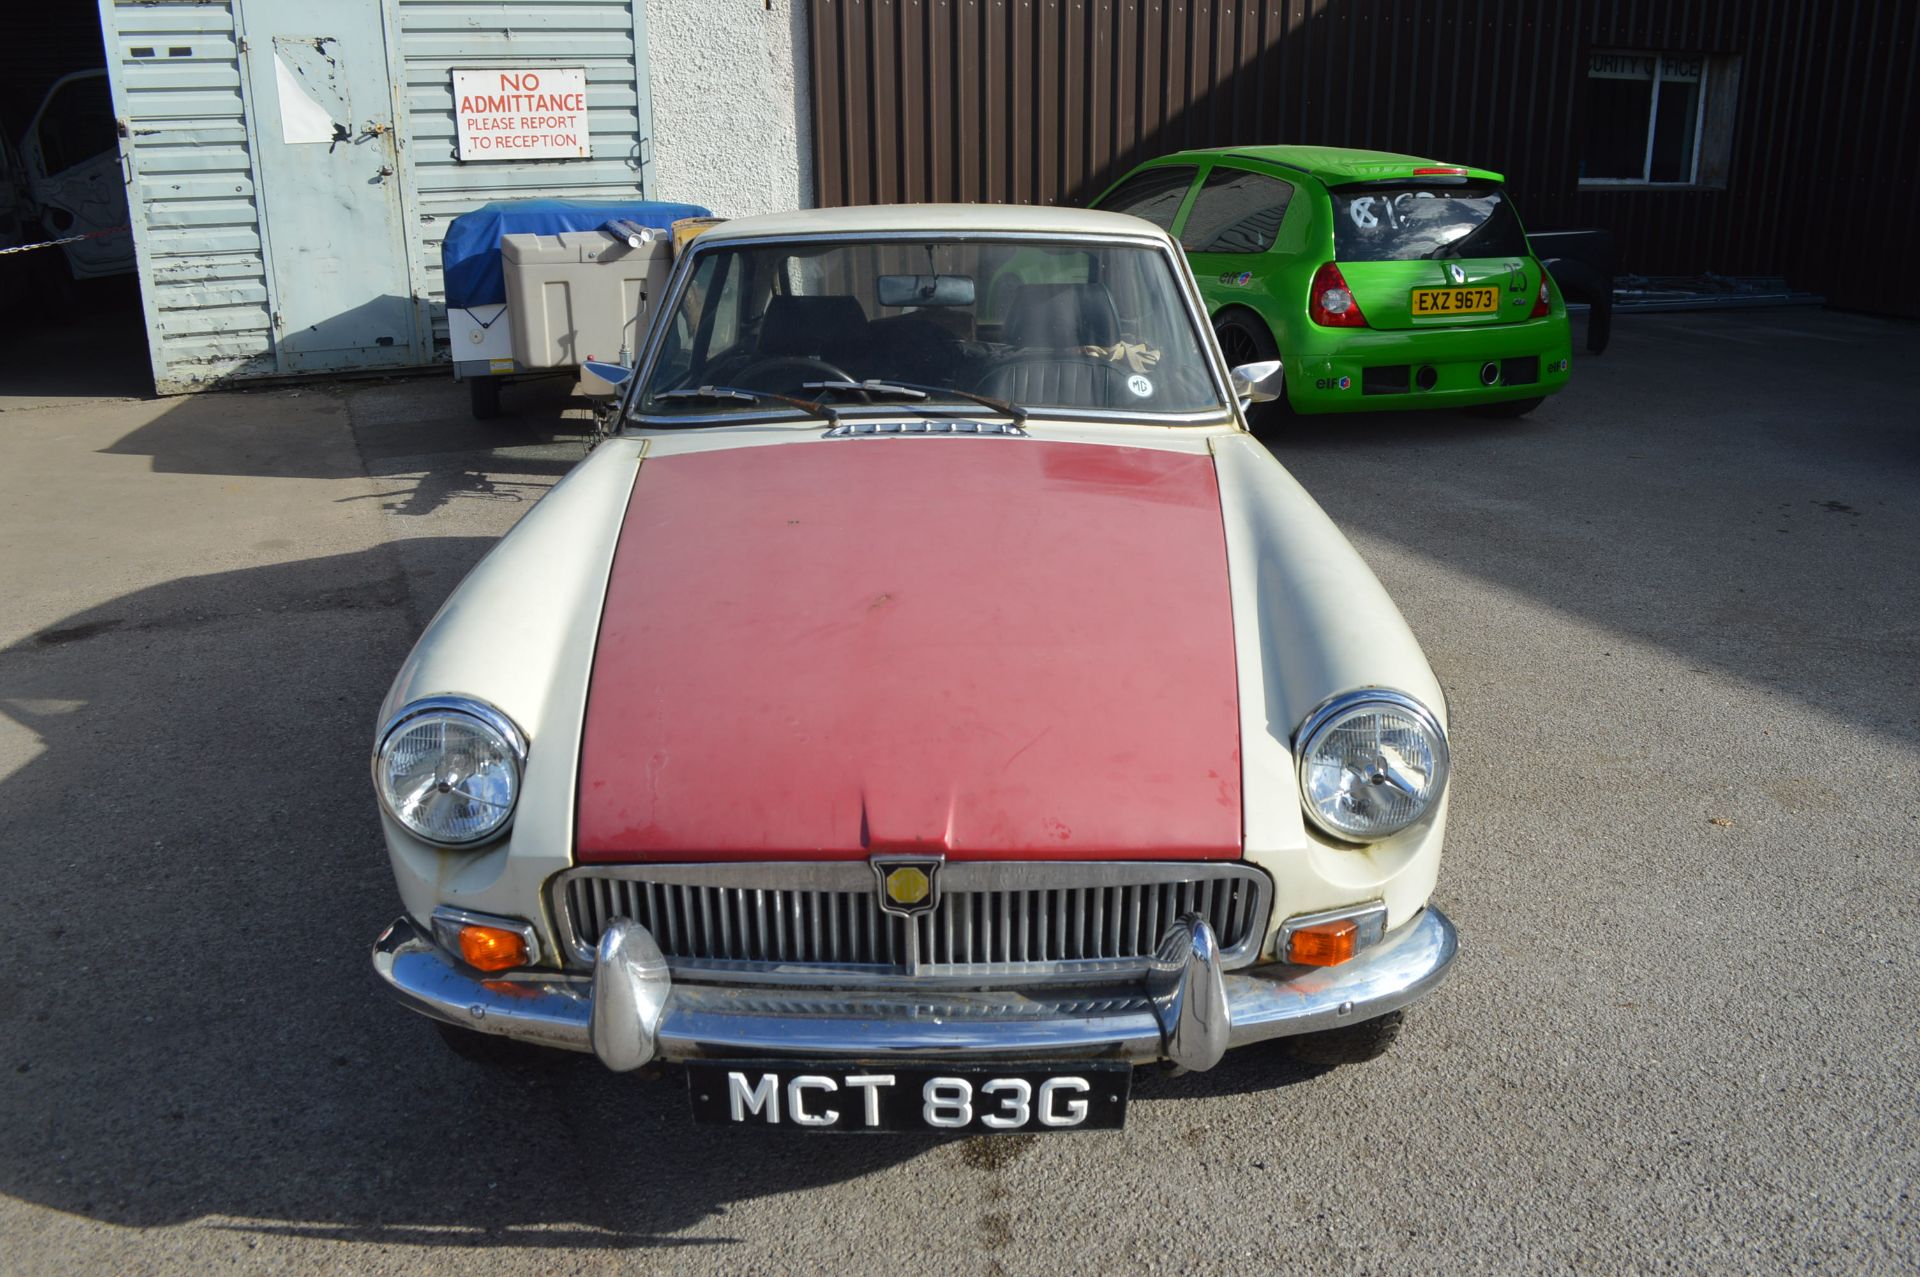 1969 MG B GT 1.8 DIESEL - SHOWING 3 FORMER KEEPERS *NO VAT* - Image 2 of 22